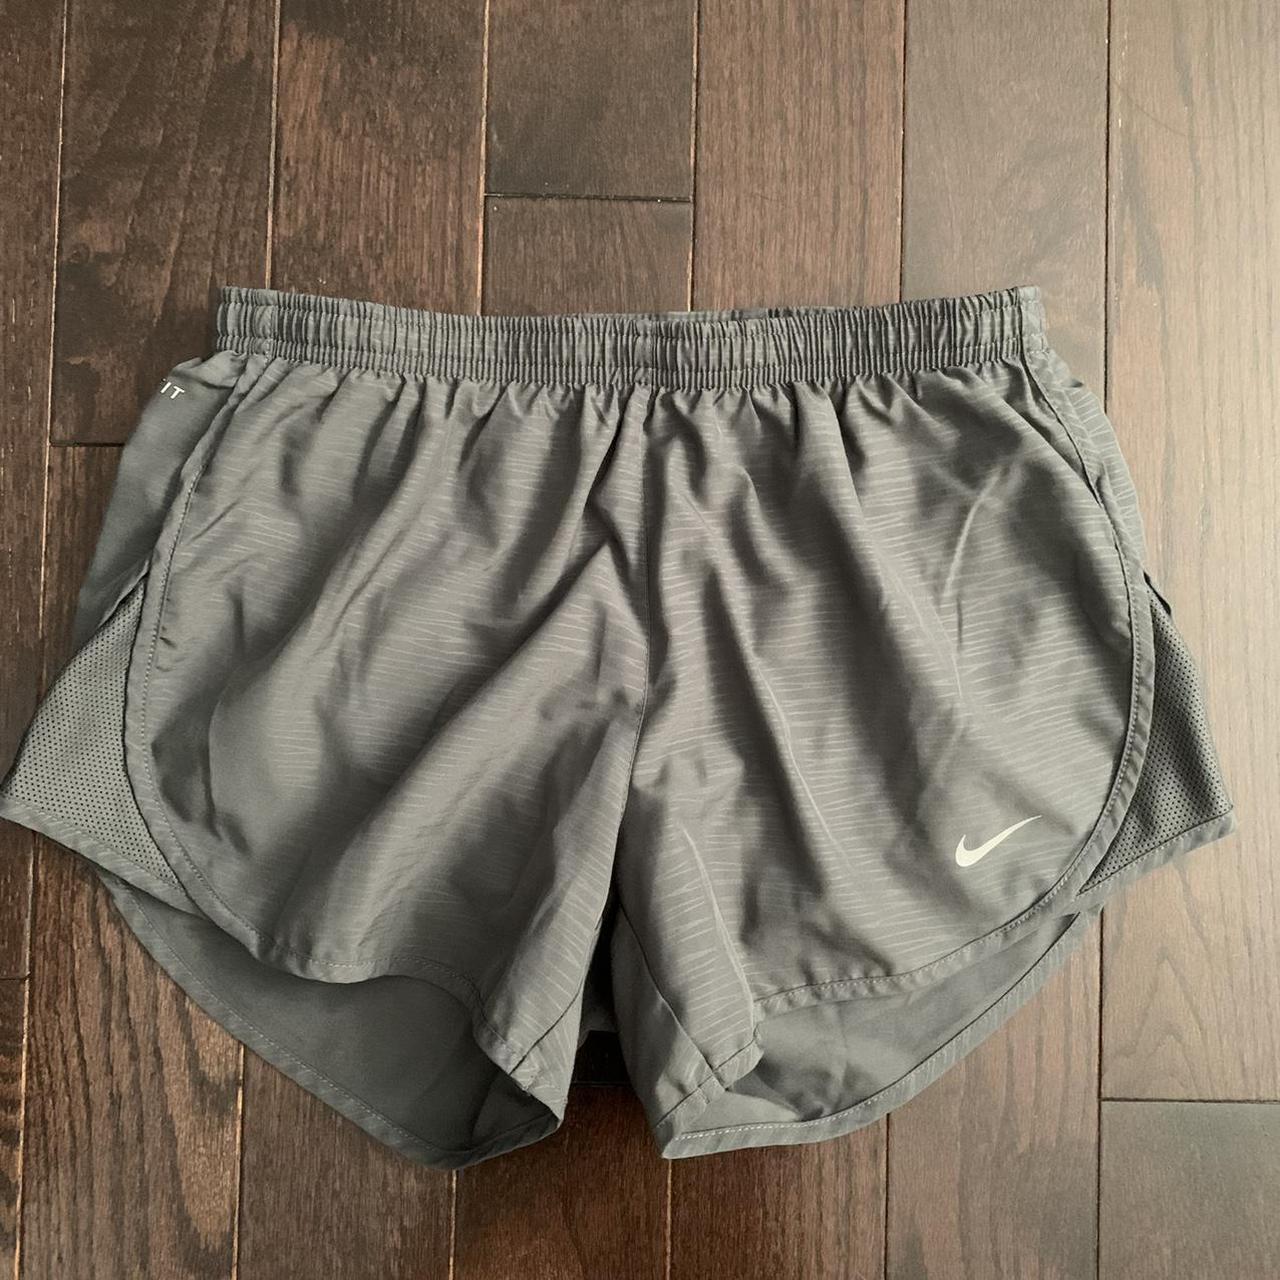 Nike Women's Grey and Silver Shorts